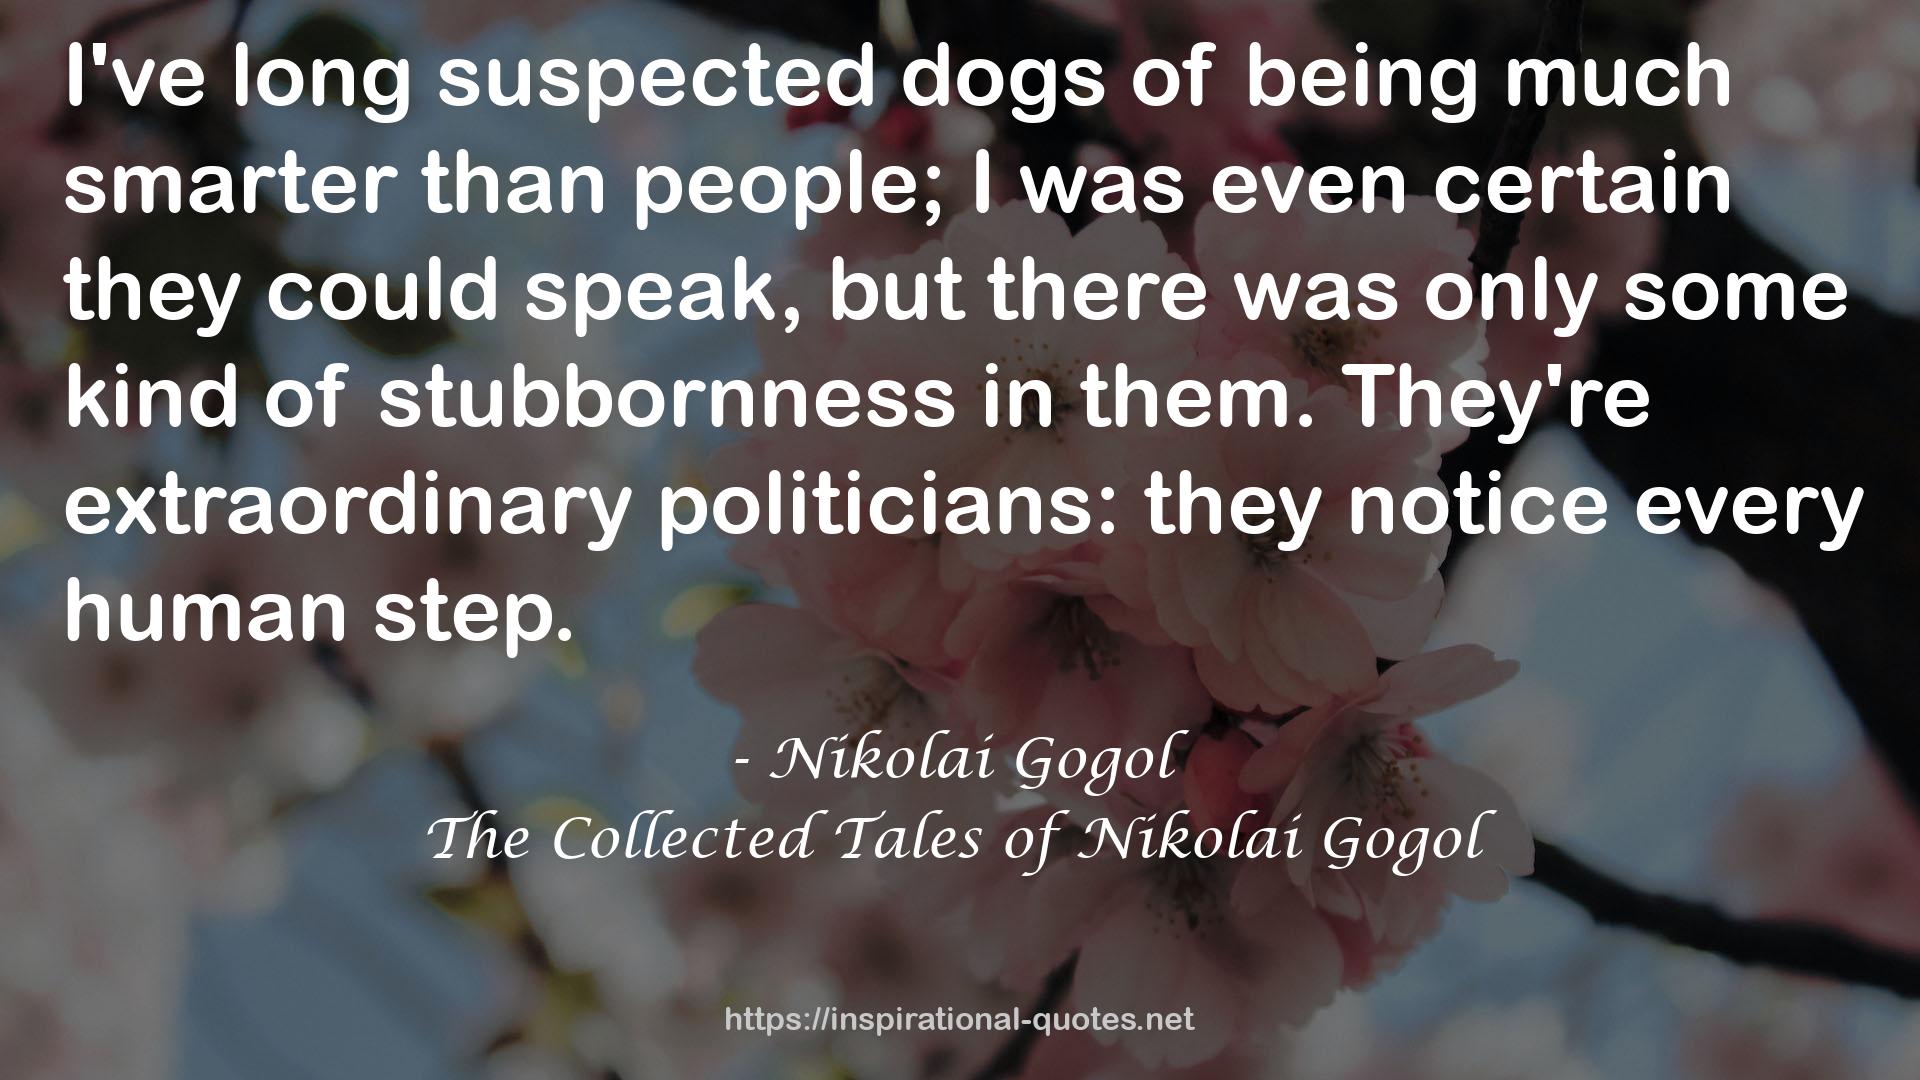 The Collected Tales of Nikolai Gogol QUOTES